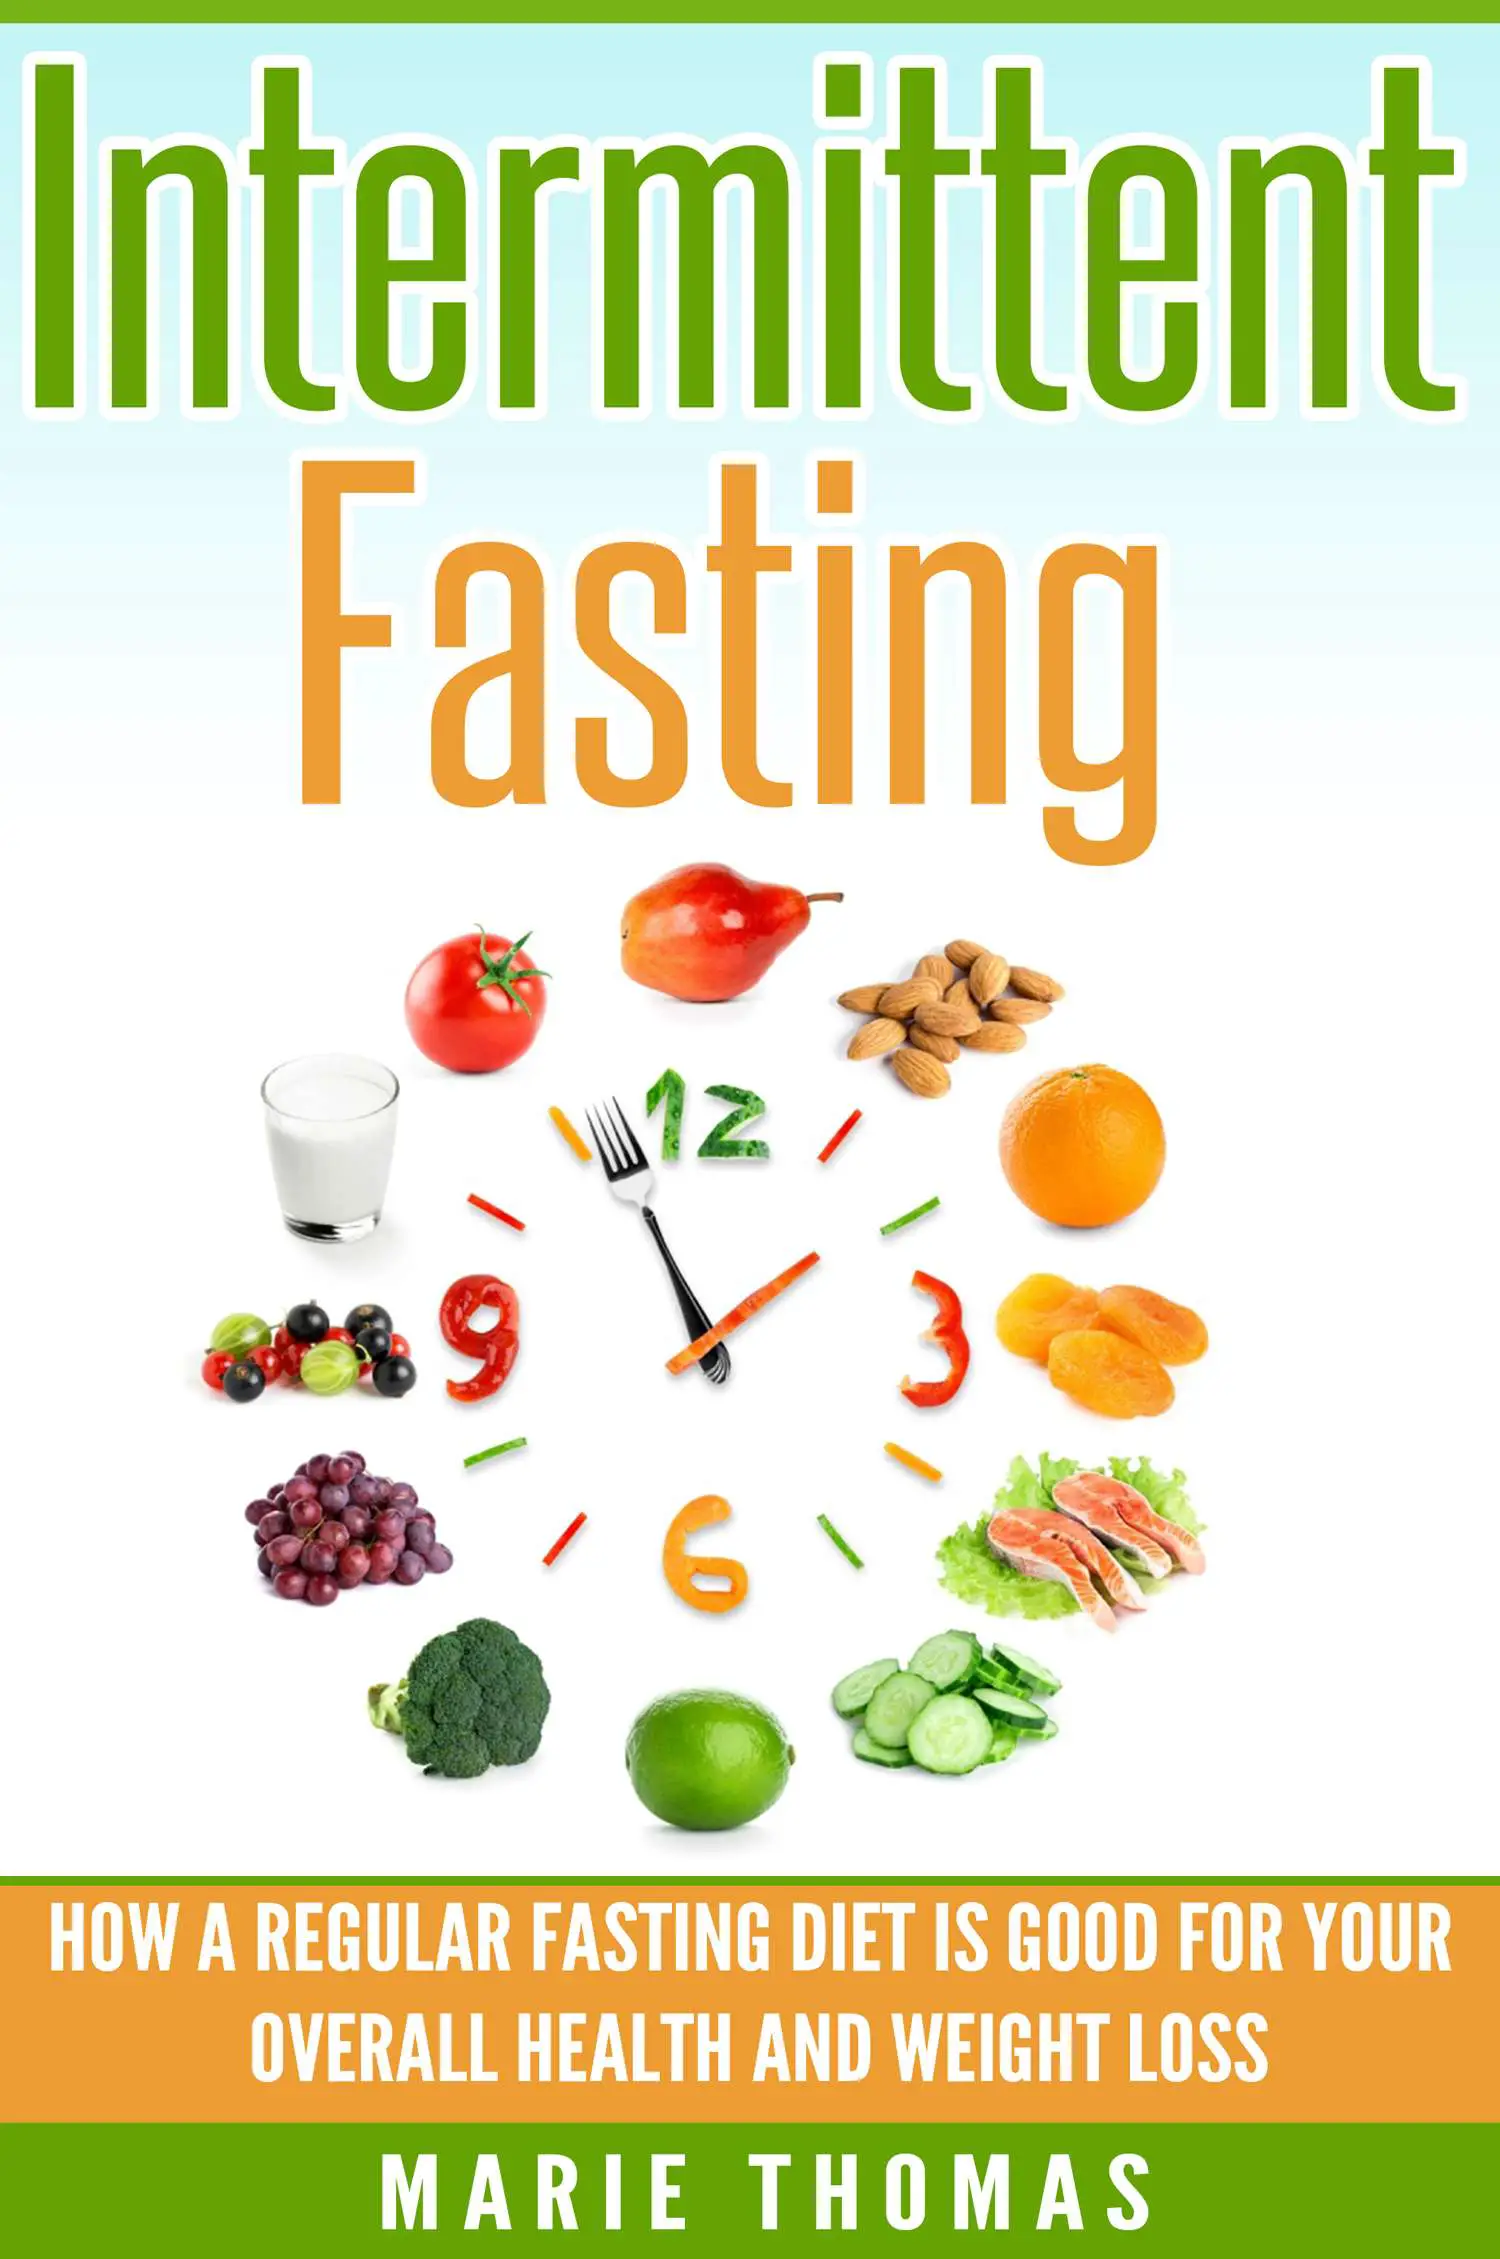 Intermittent Fasting: How a Regular Fasting Diet is Good for Your ...